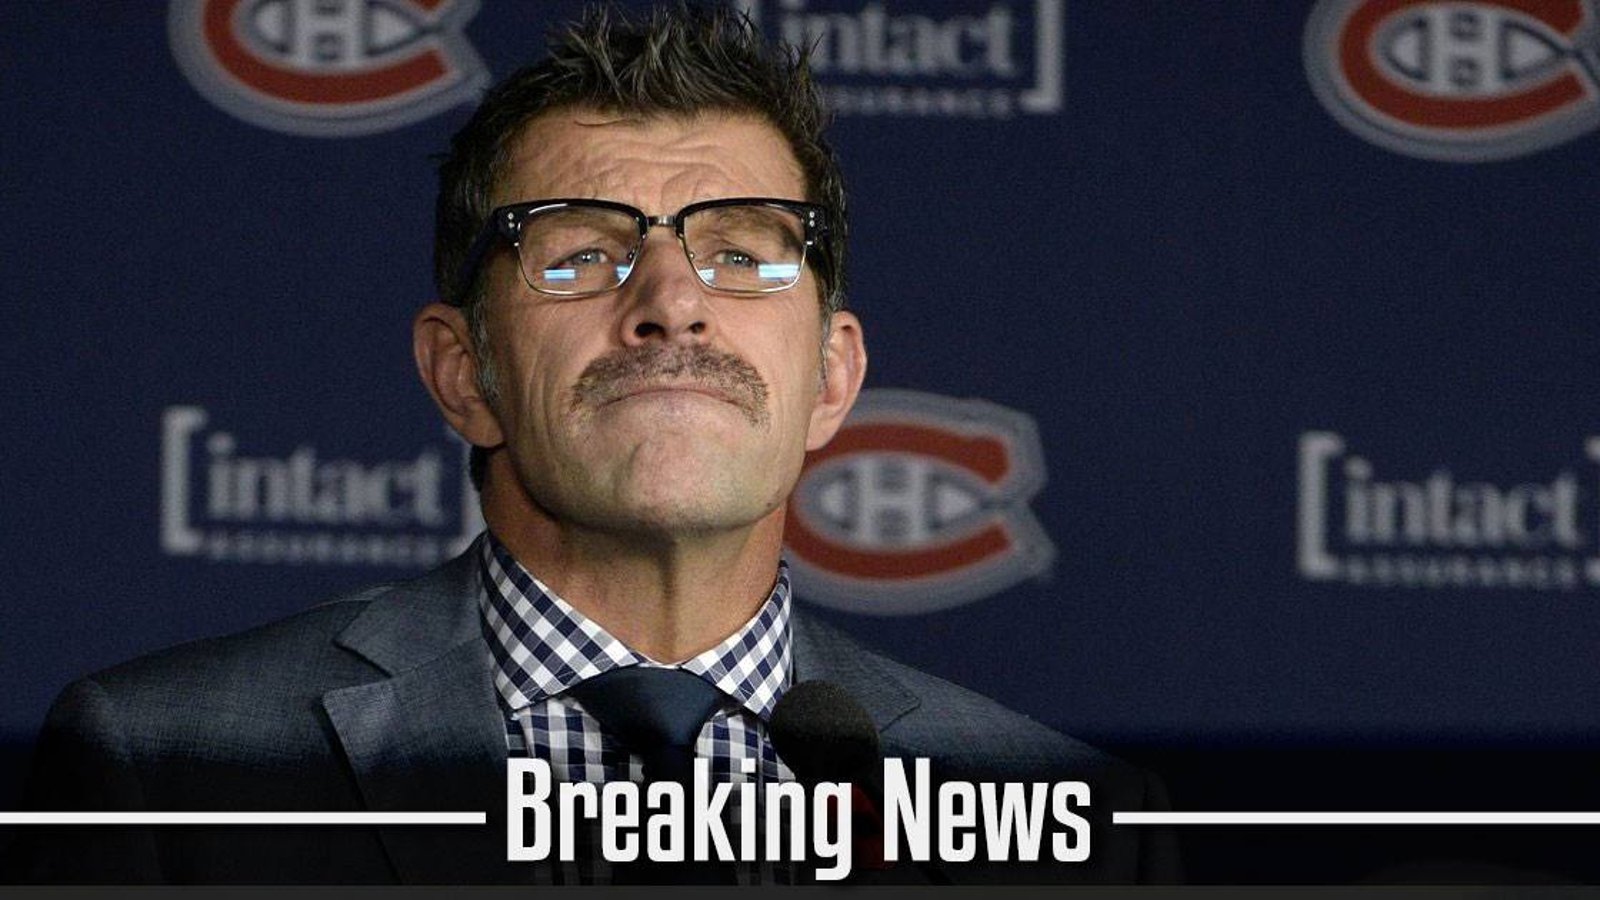 Breaking NHL GM publicly humiliates his own player with disrespectful comments to the media.